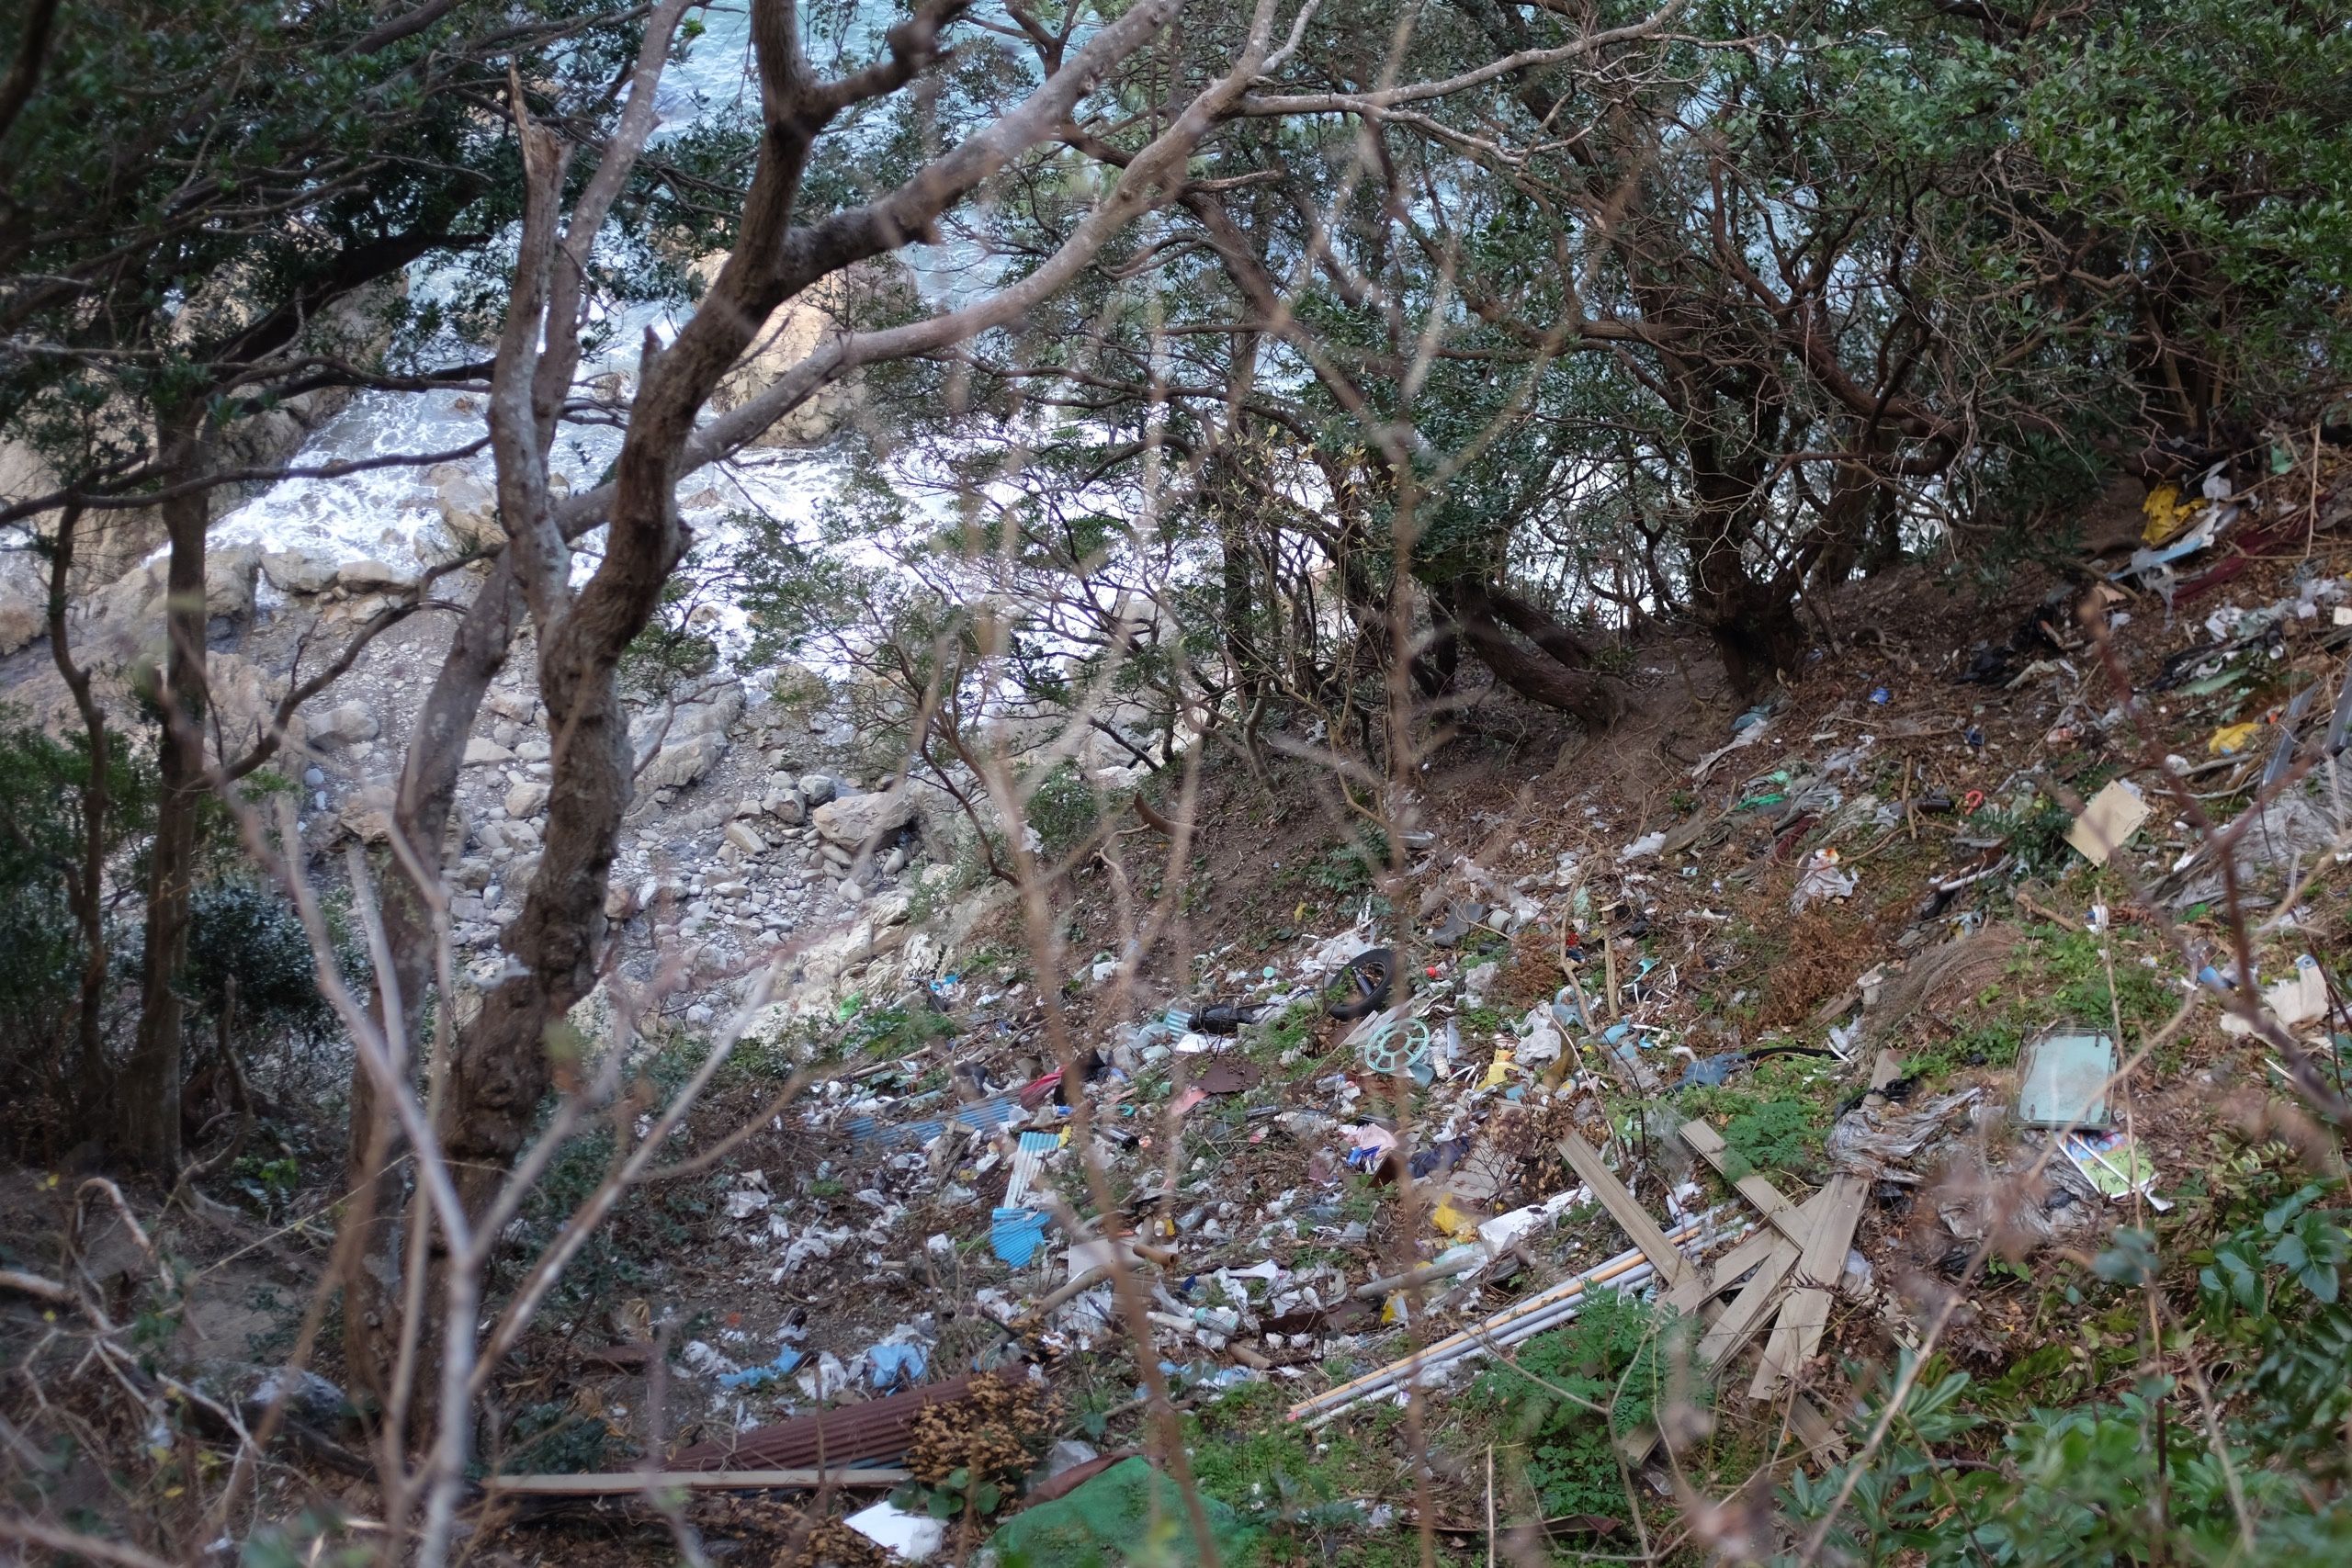 Trash covers the floor of a steep forest, with the sea visible behind the leaves.